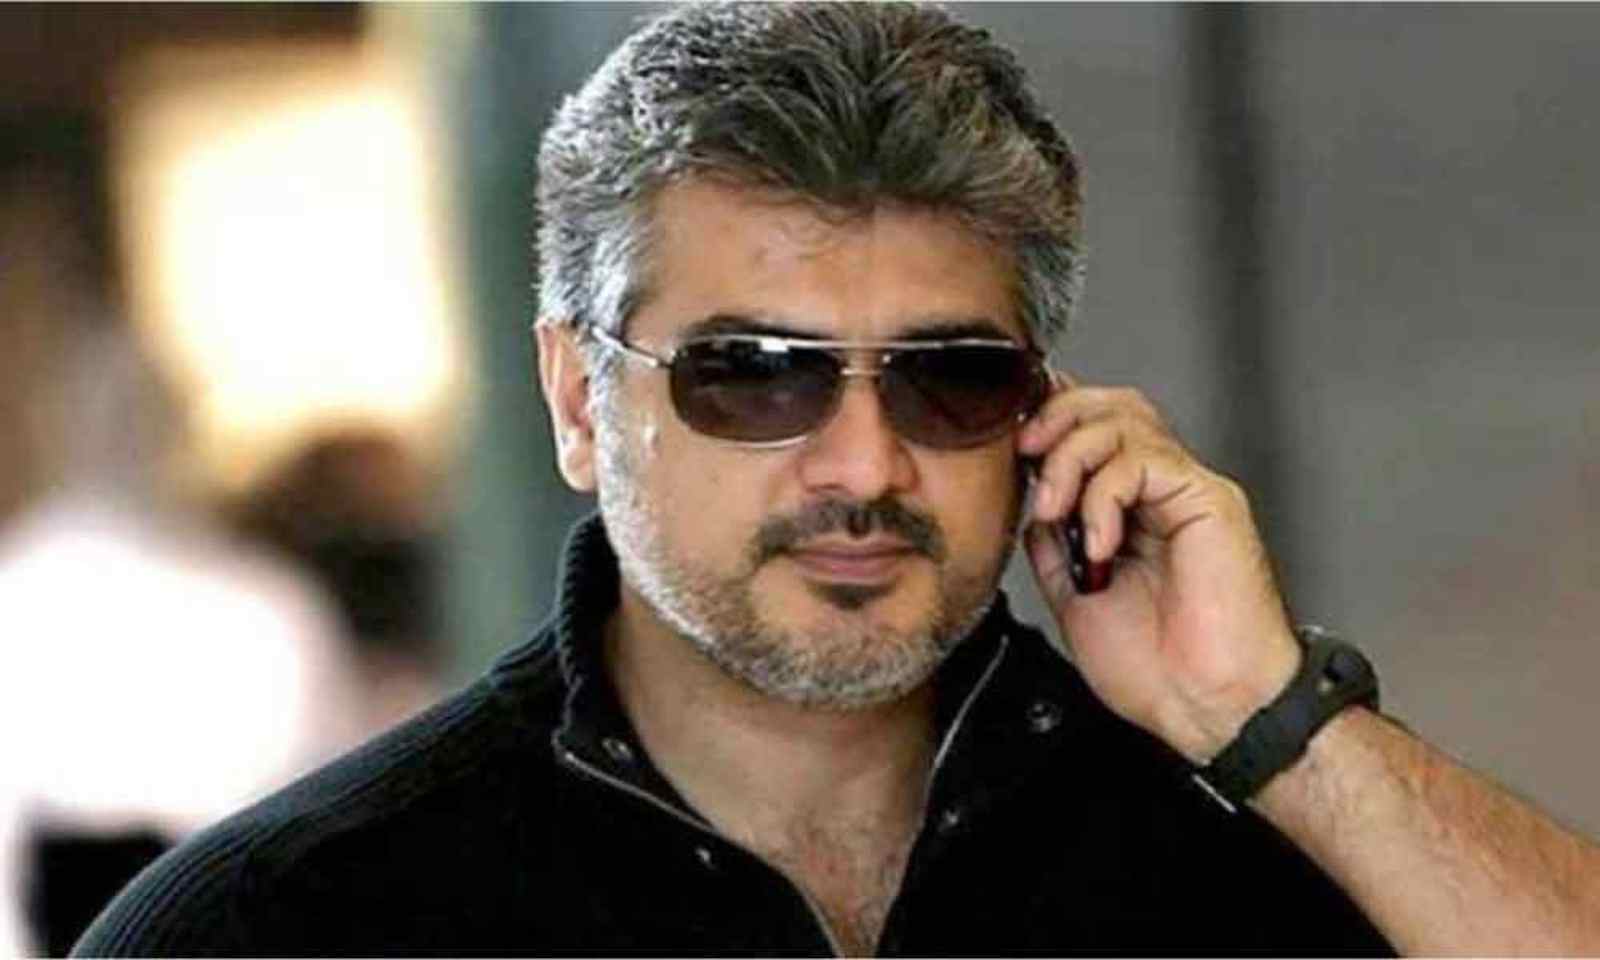 Thala Ajith Has A Heart Of Gold: Here's Proof